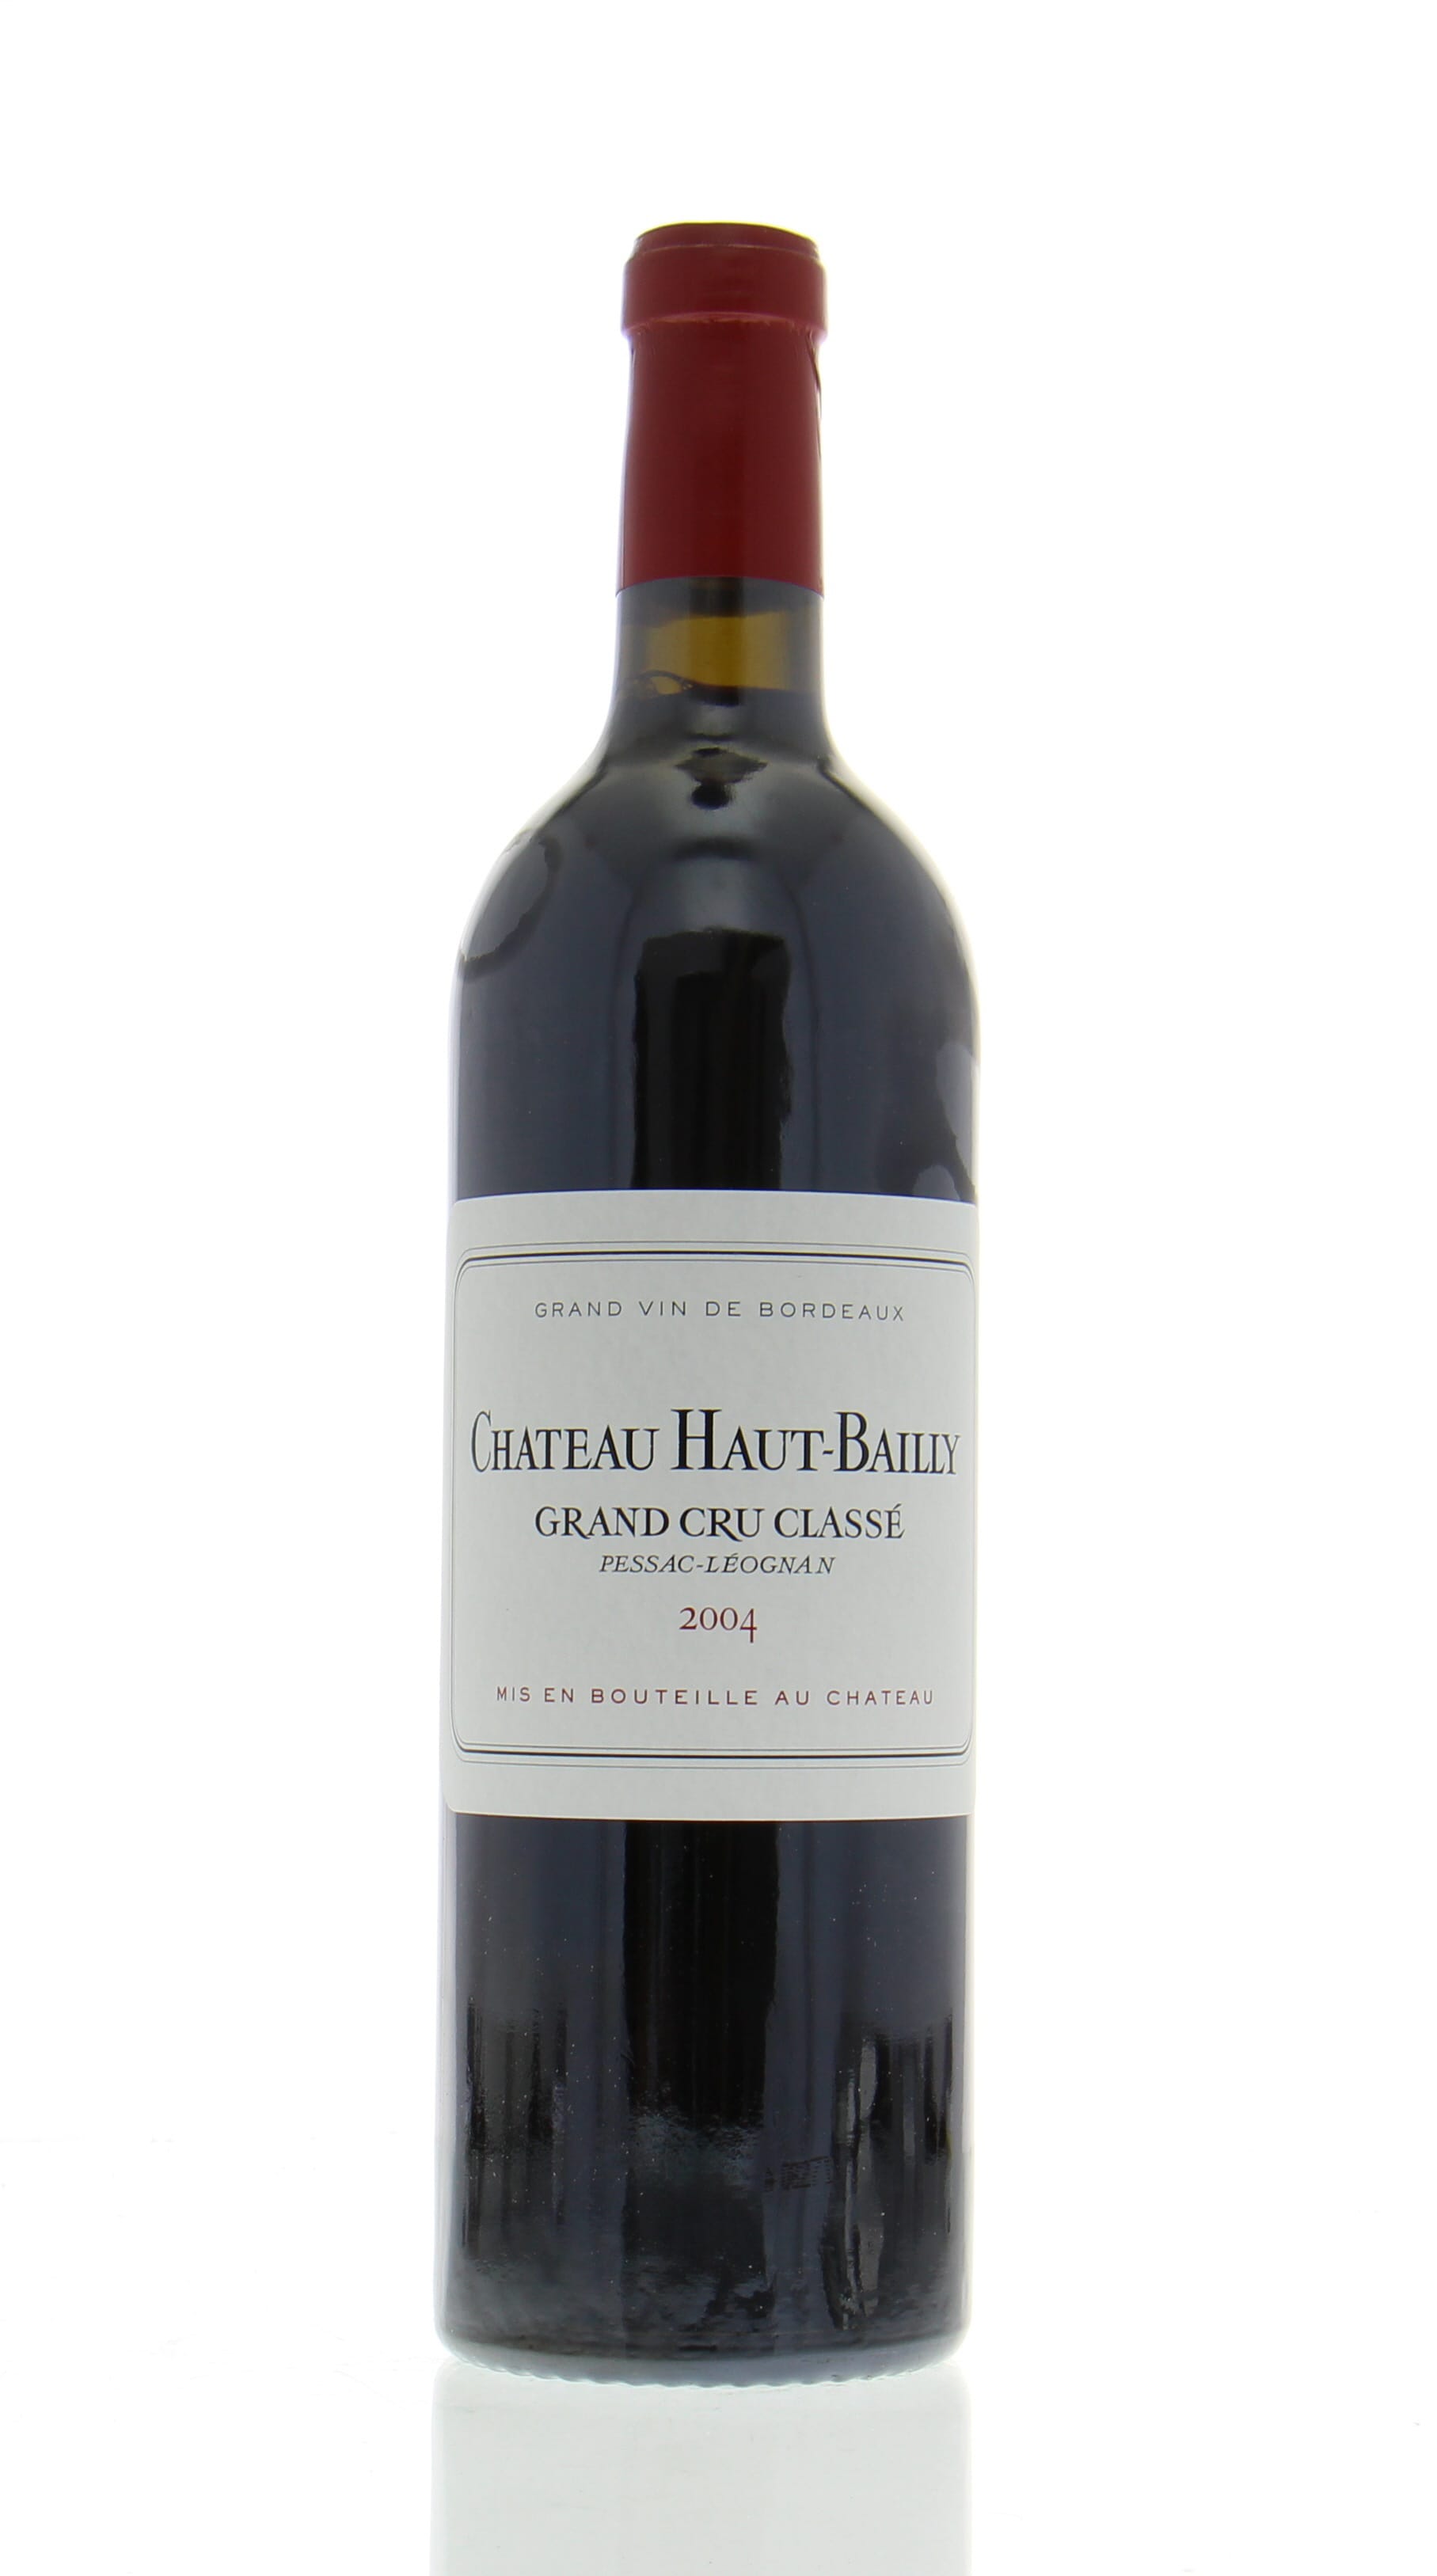 Chateau Haut Bailly - Chateau Haut Bailly 2004